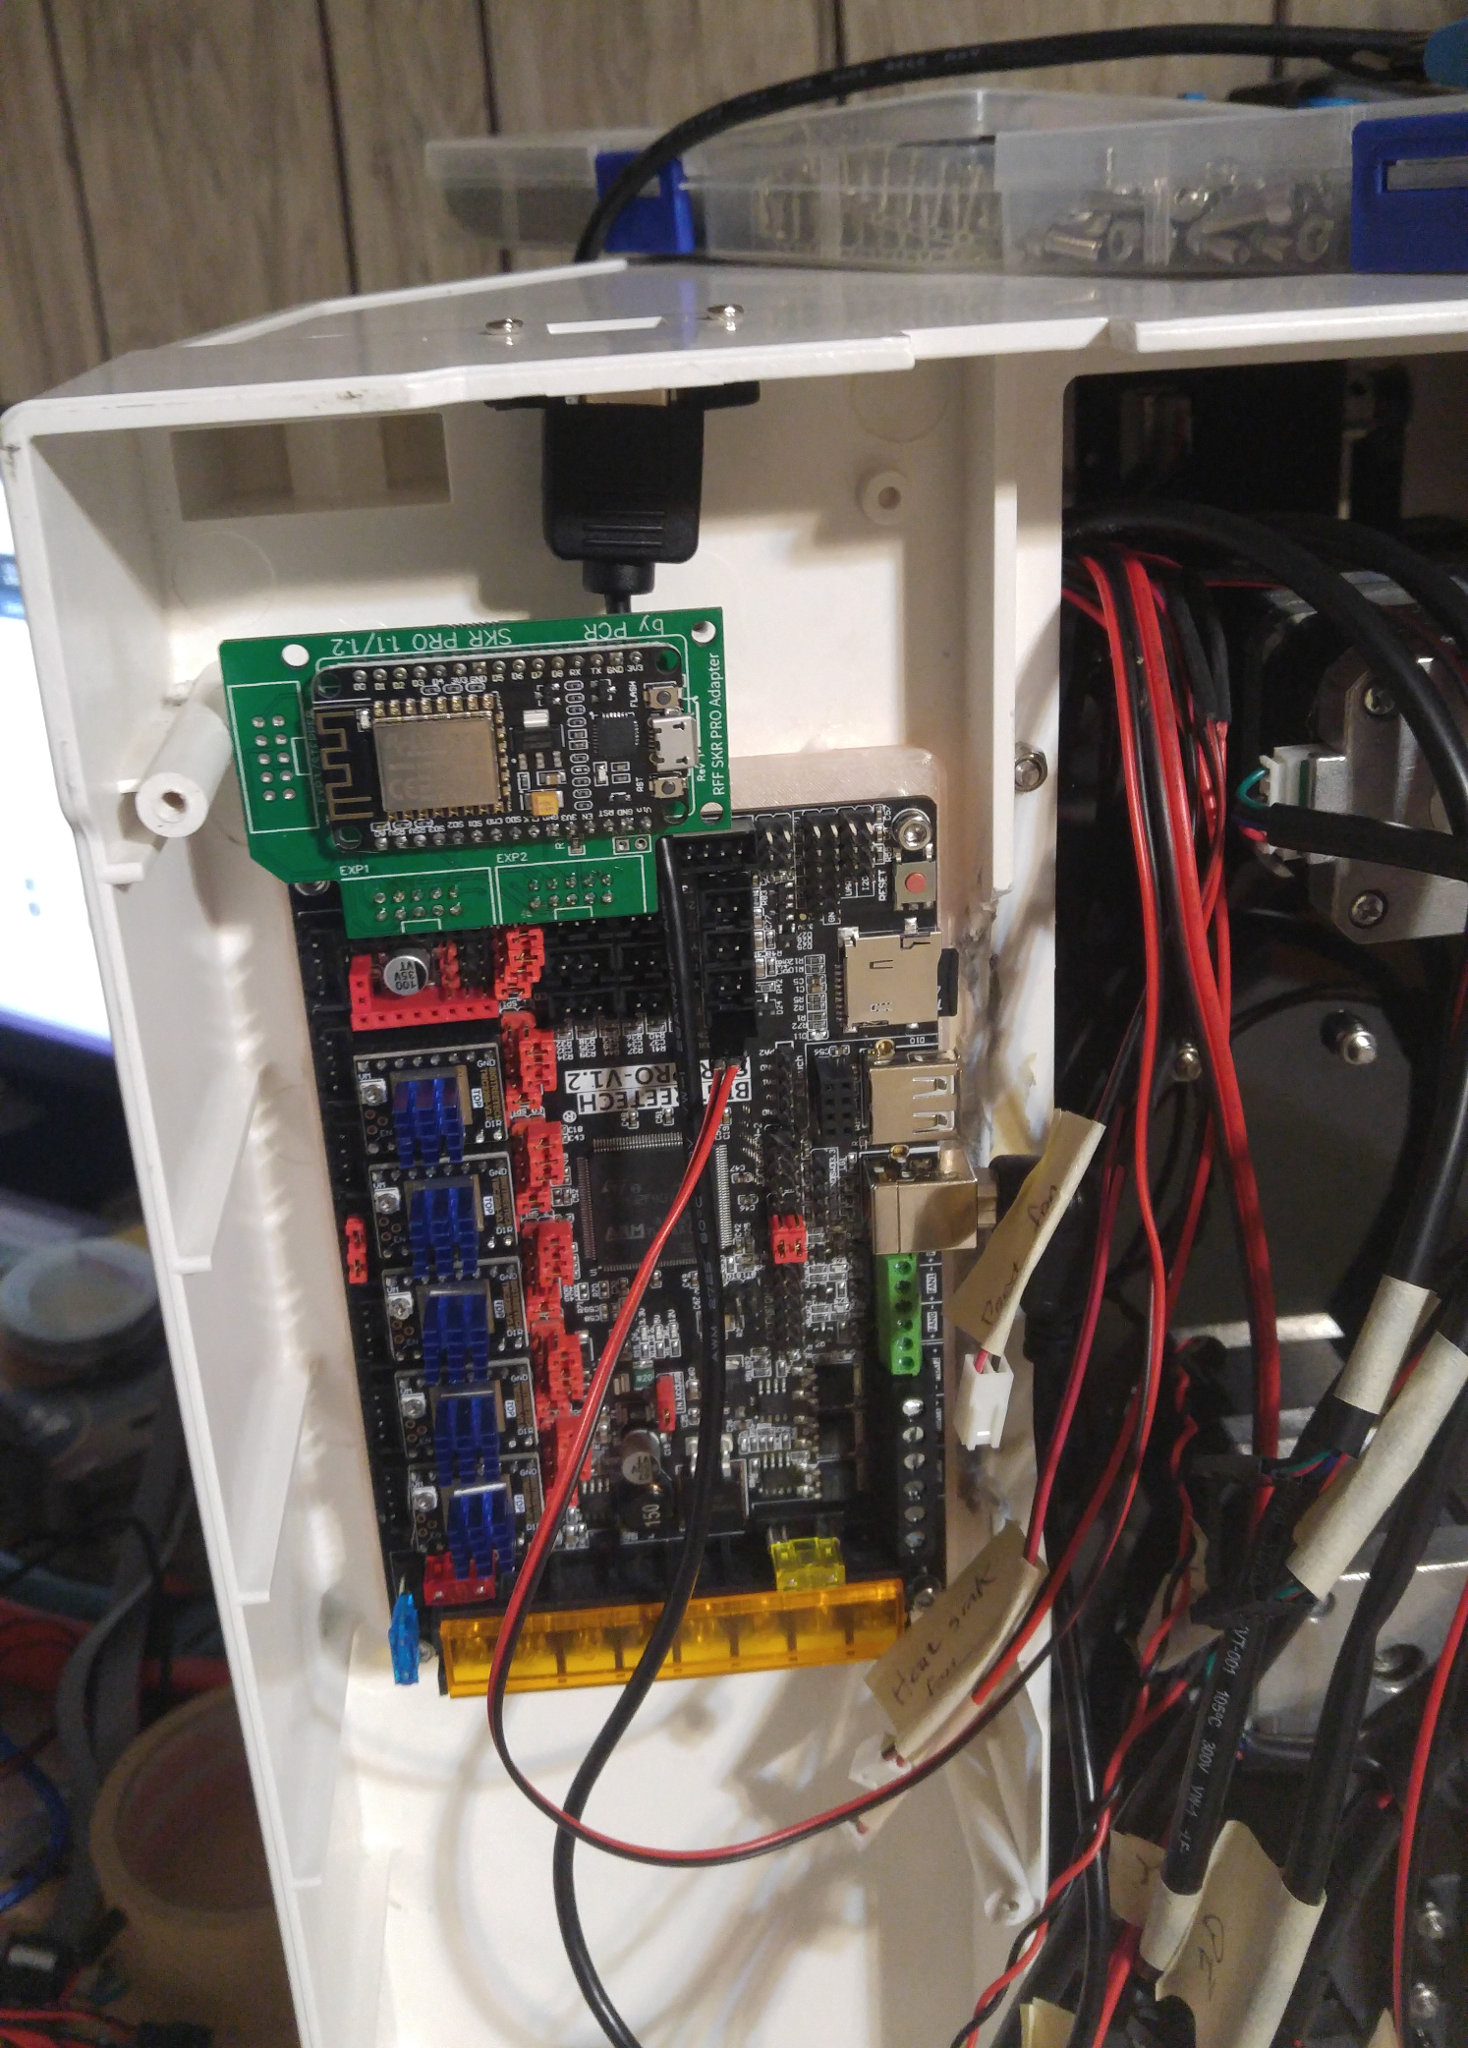 The board mounts on its bracket with its USB port and micro-SD card slot facing the center of the printer